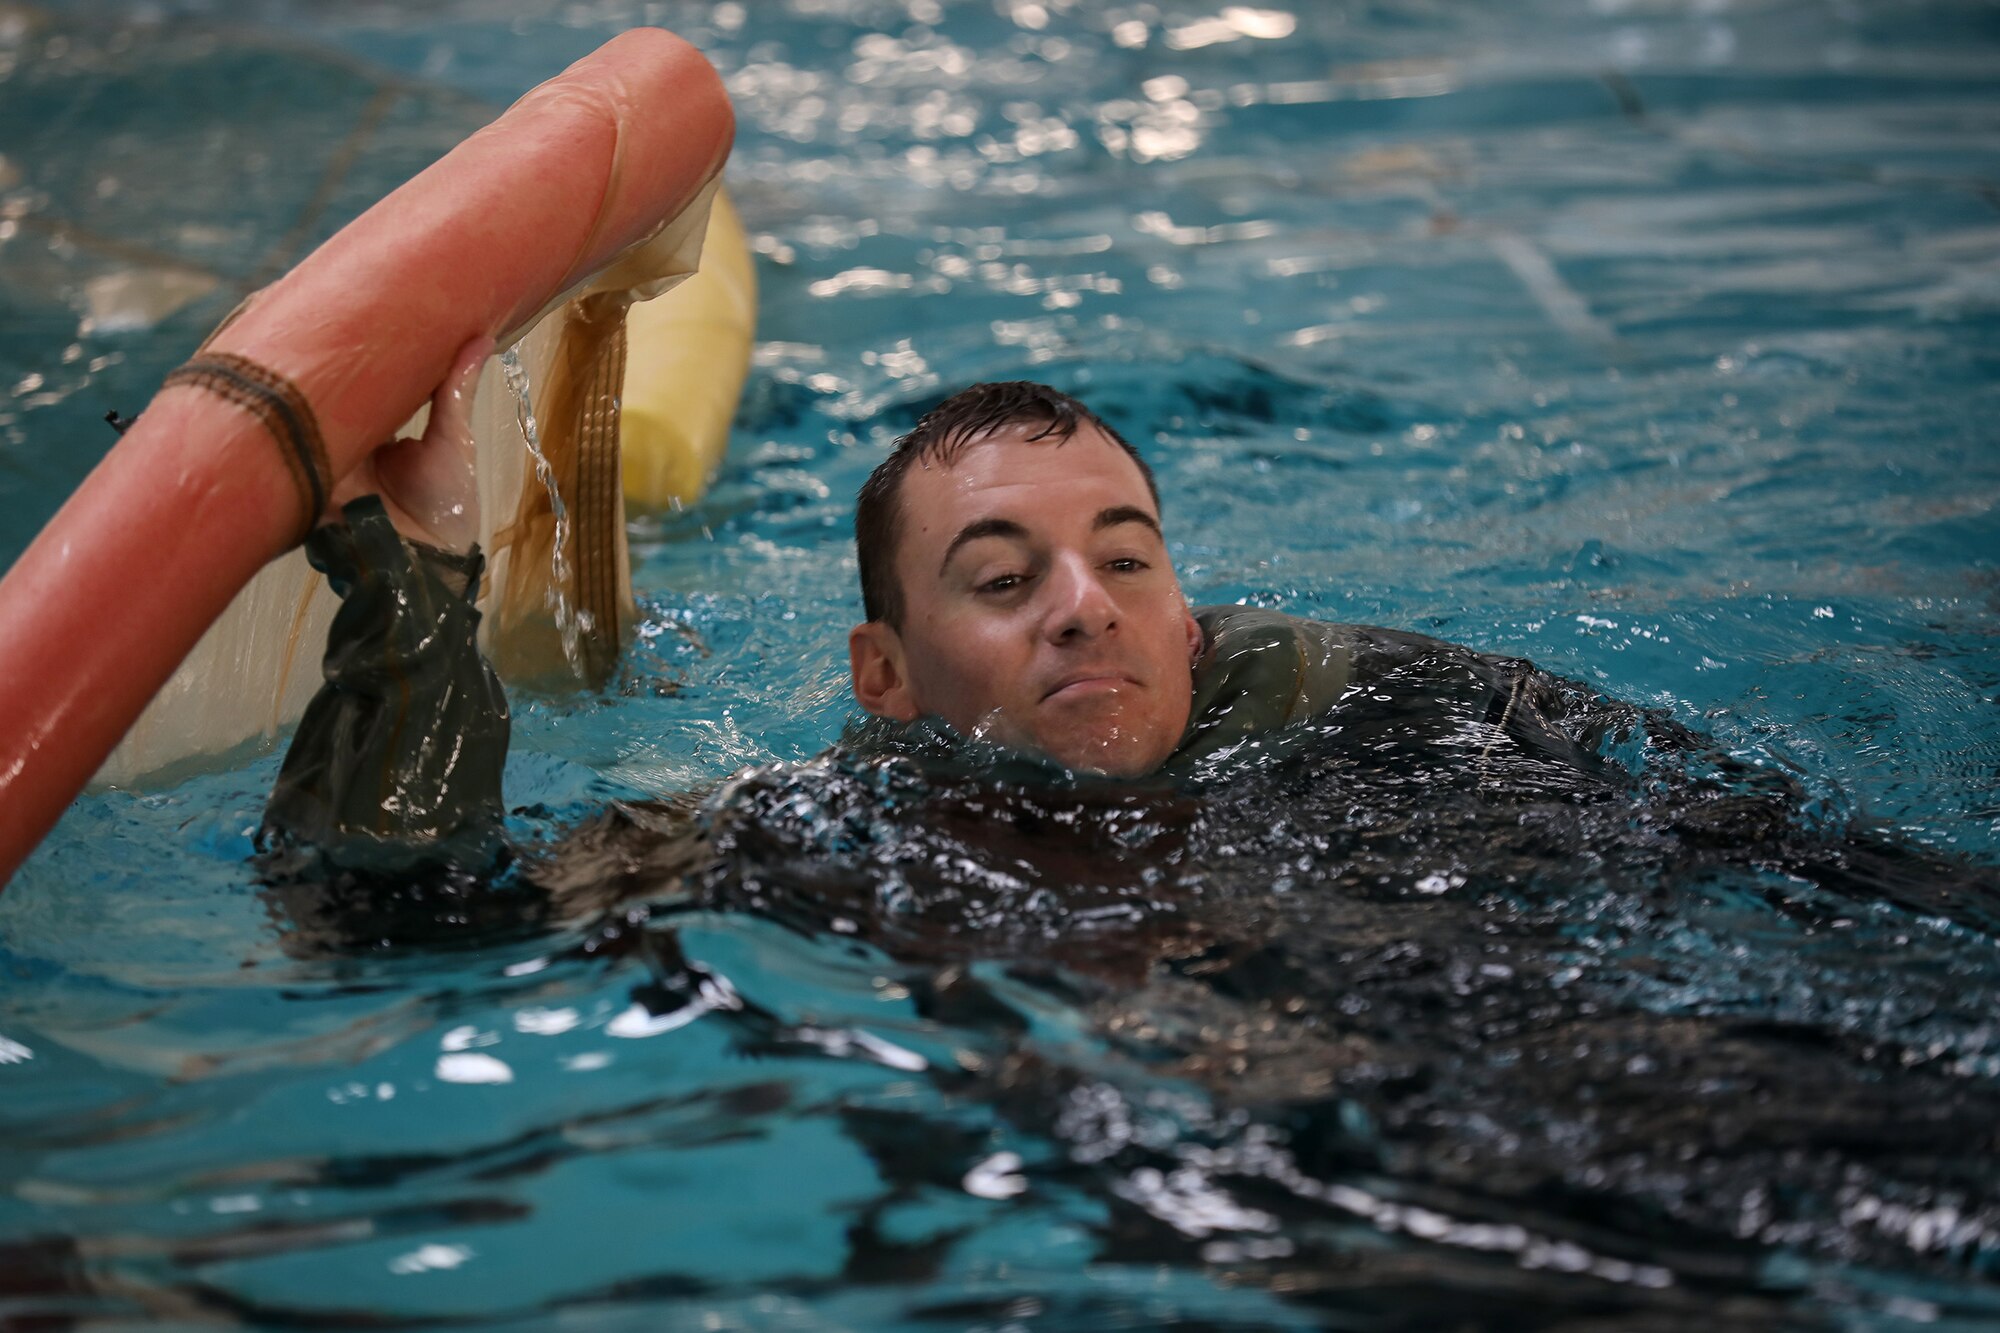 Staff Sgt. Steven Murphy, 89th Airlift Squadron loadmaster, participates in water survival training Jan. 25, 2019. Members of the 445th Airlift Wing Operations Group performed their annual training at Naval Amphibious Base, Coronado and Marine Corps Air Station Miramar near San Diego, California Jan. 18-27, 2019. The training included water survival, Survival, Evasion, Resistance and Evasion, and low altitude flying. (U.S. Air Force photo/Master Sgt. Patrick O’Reilly)